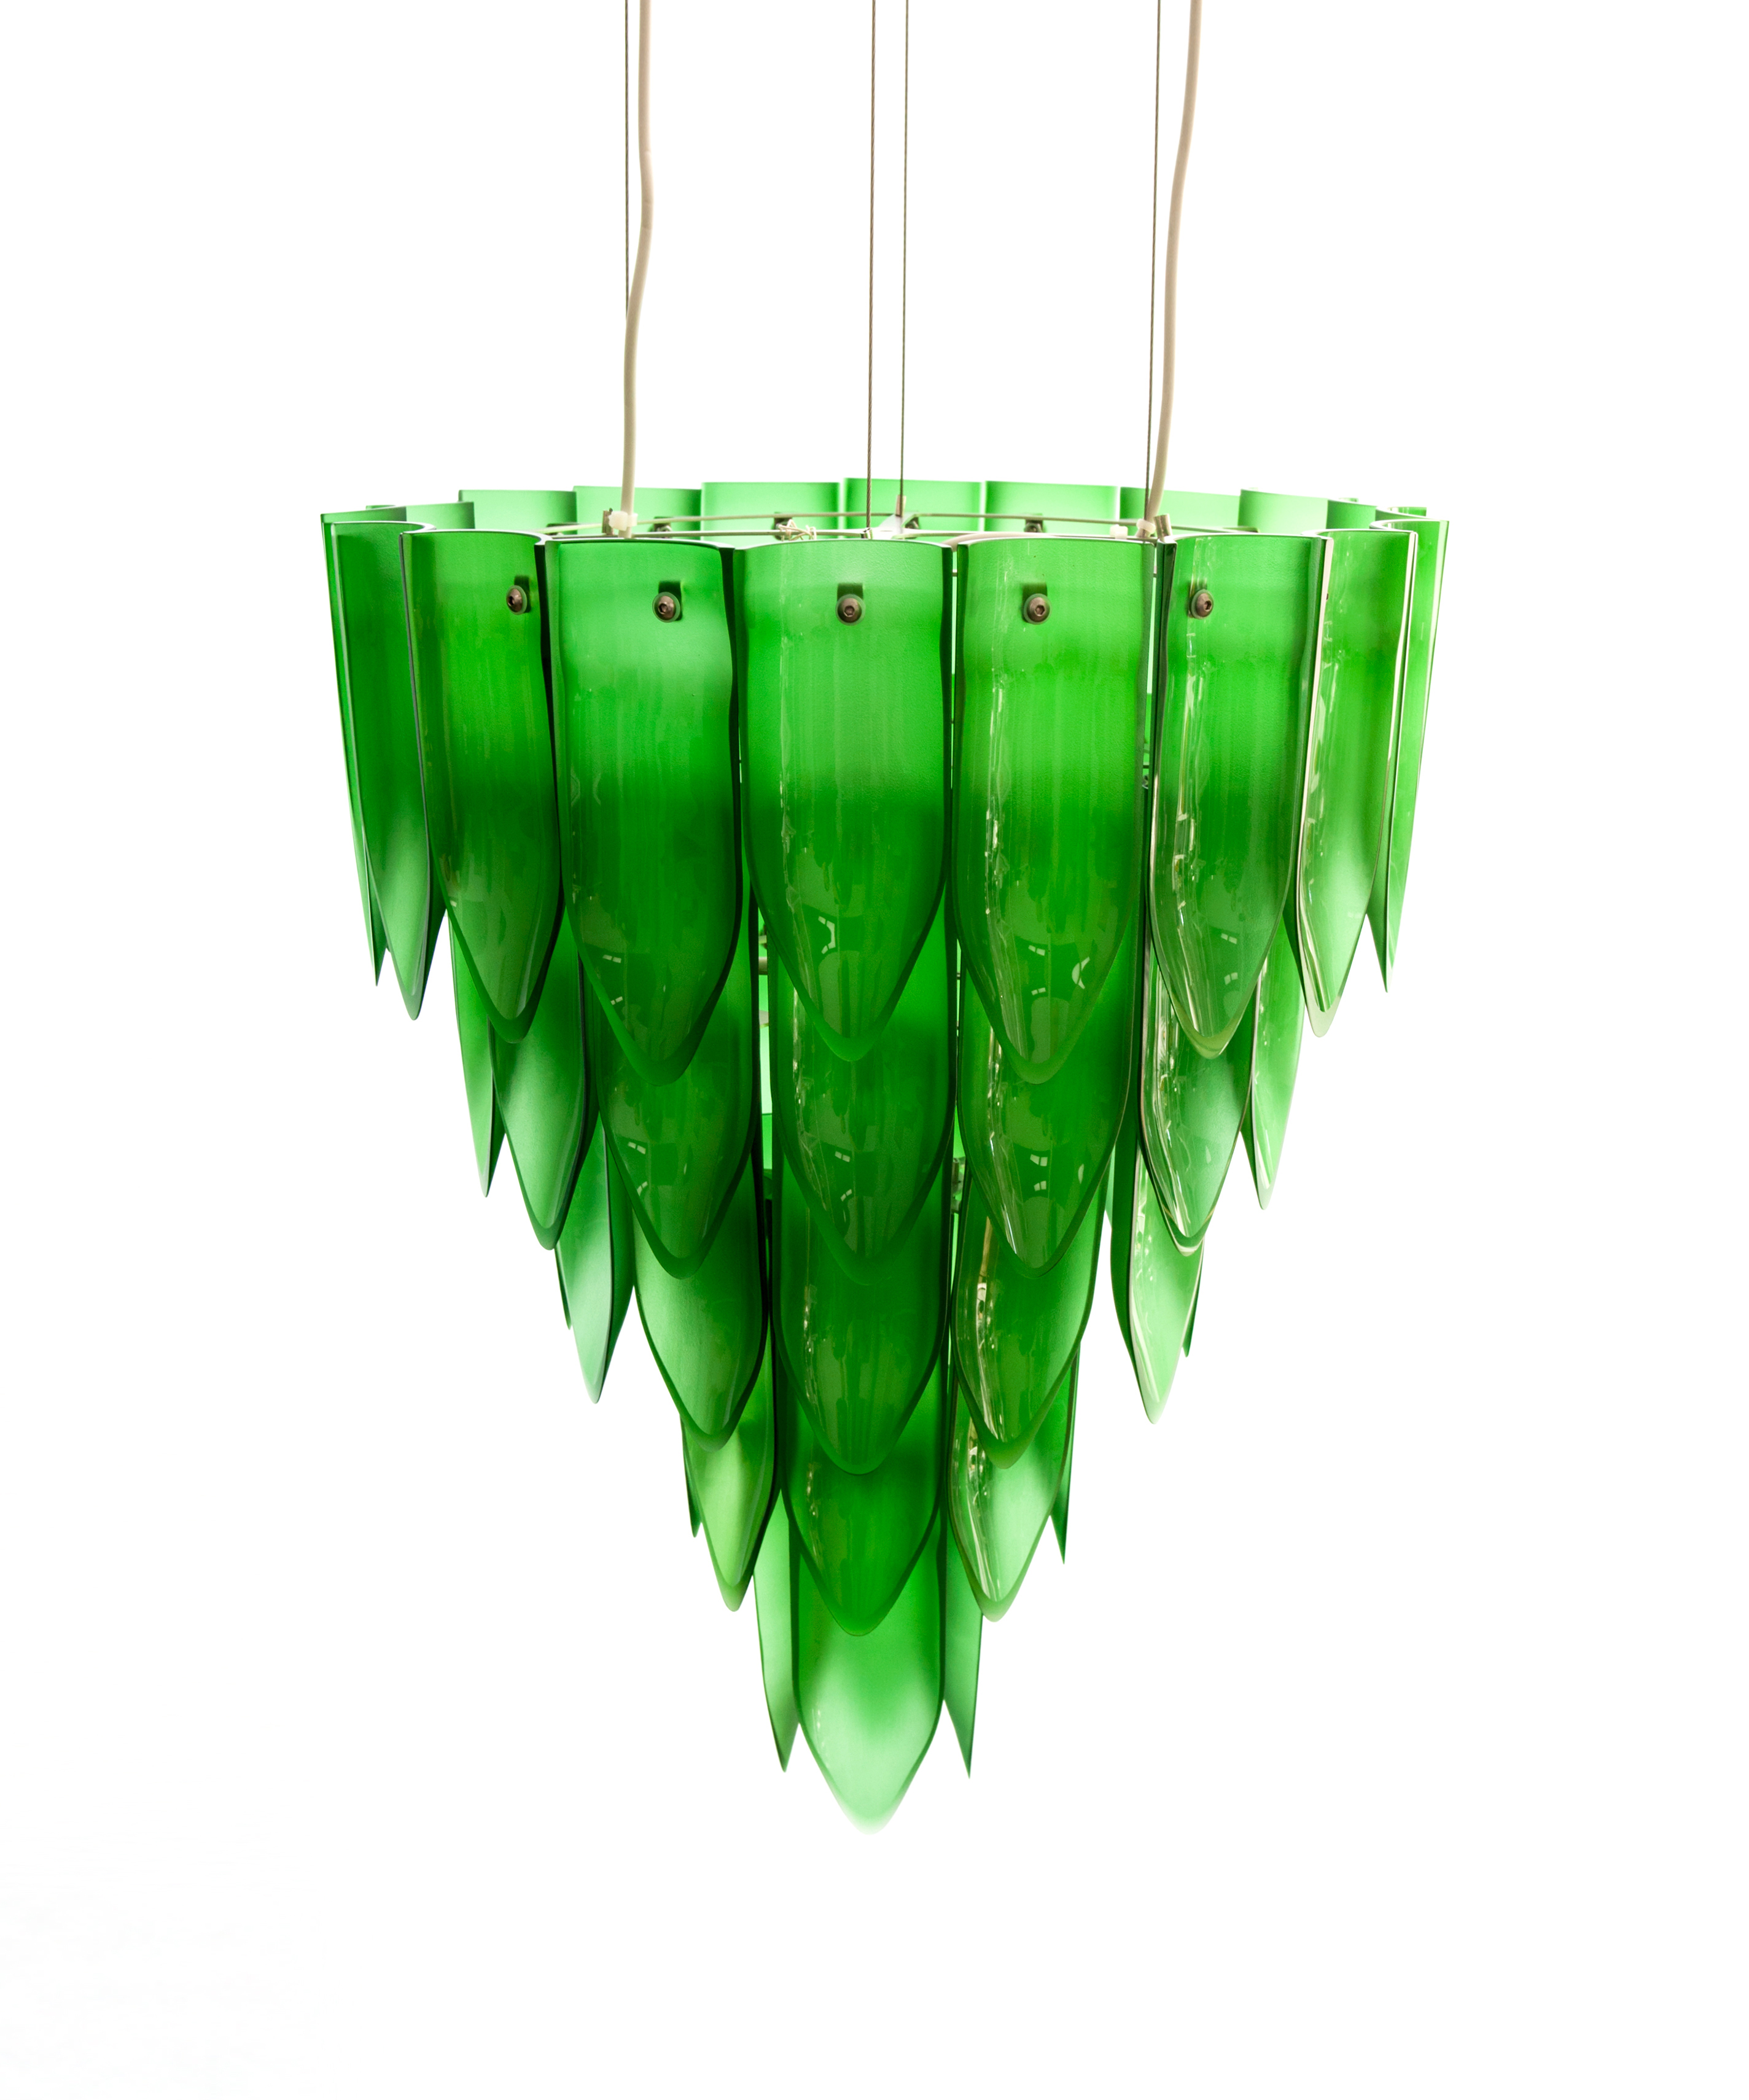 Presenting the Transglass Chandelier